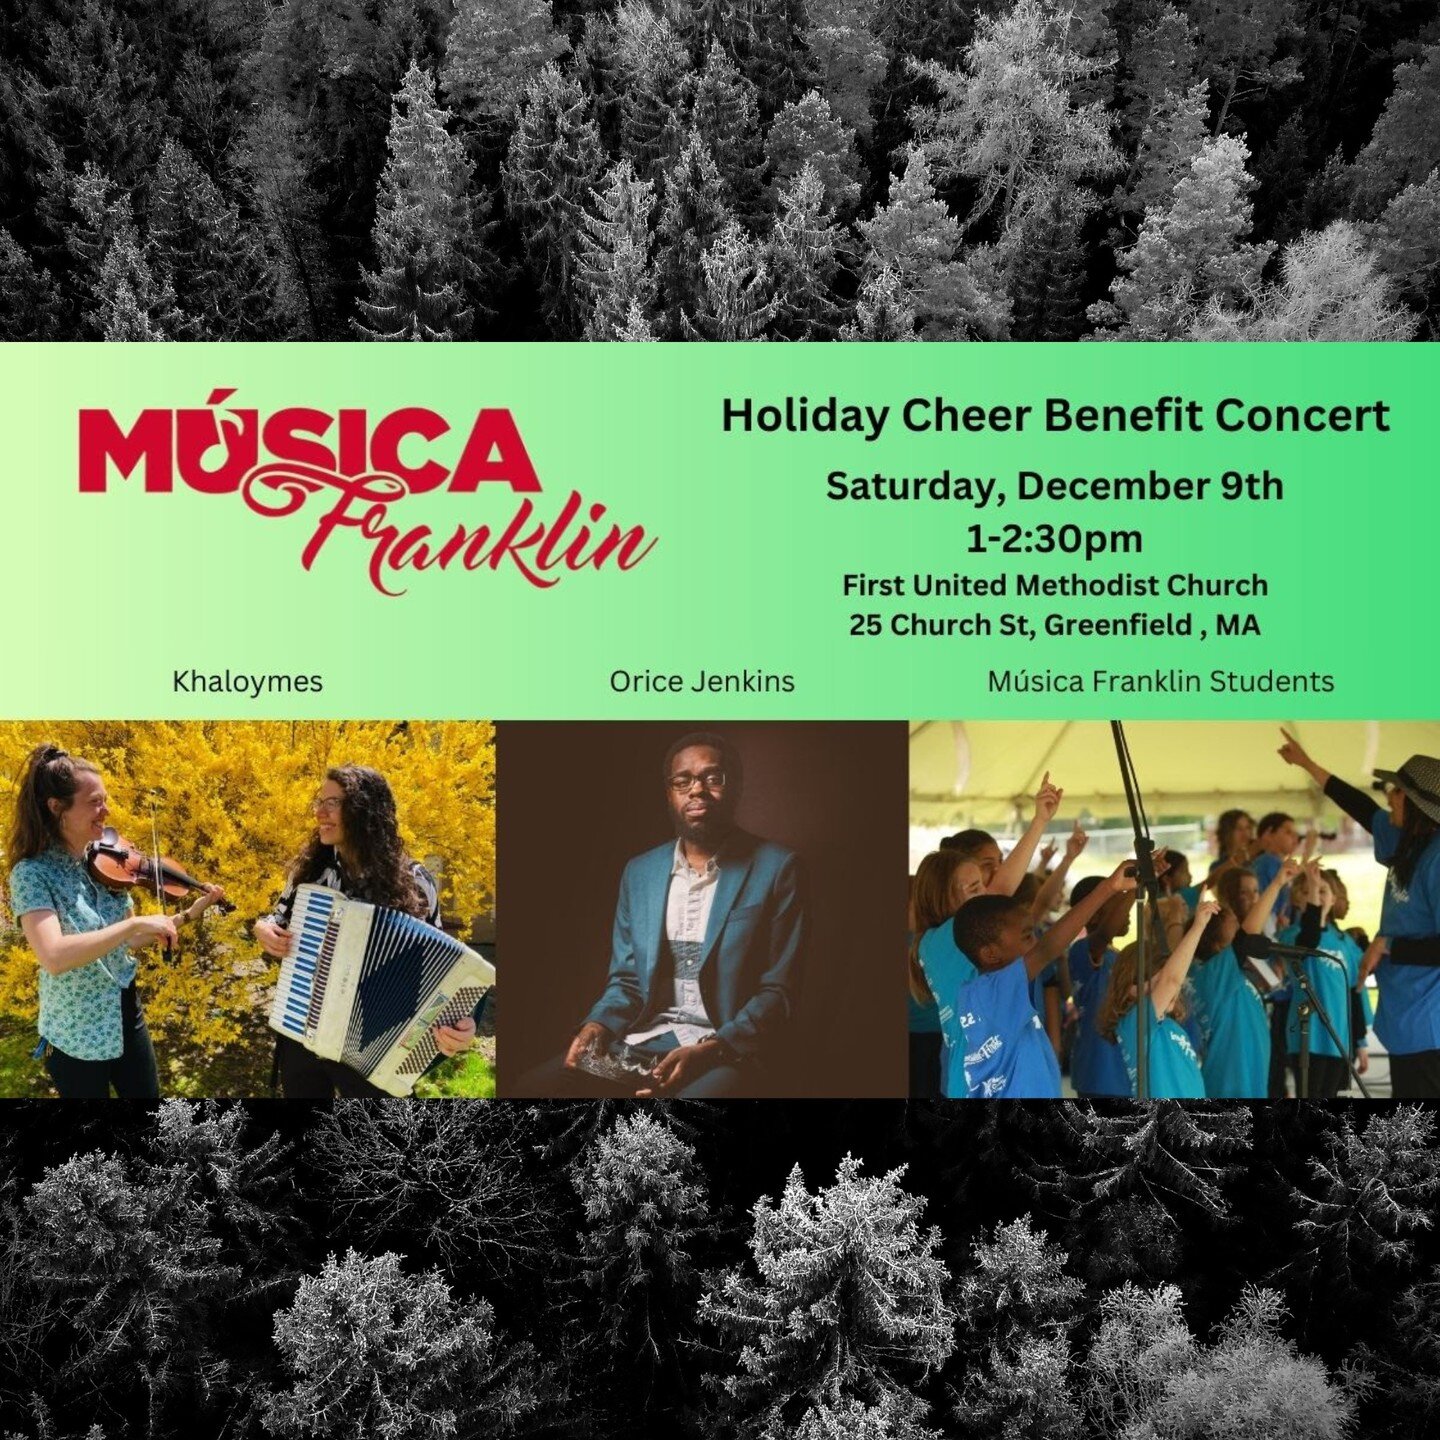 ACF Recommendation! 🍄🌱 Our friends at M&uacute;sica Franklin will be hosting their second annual Holiday Cheer Benefit Concert on Saturday, December 9th from 1-2:30pm. This family friendly event will feature the music of Nat &ldquo;King'' Cole, sea